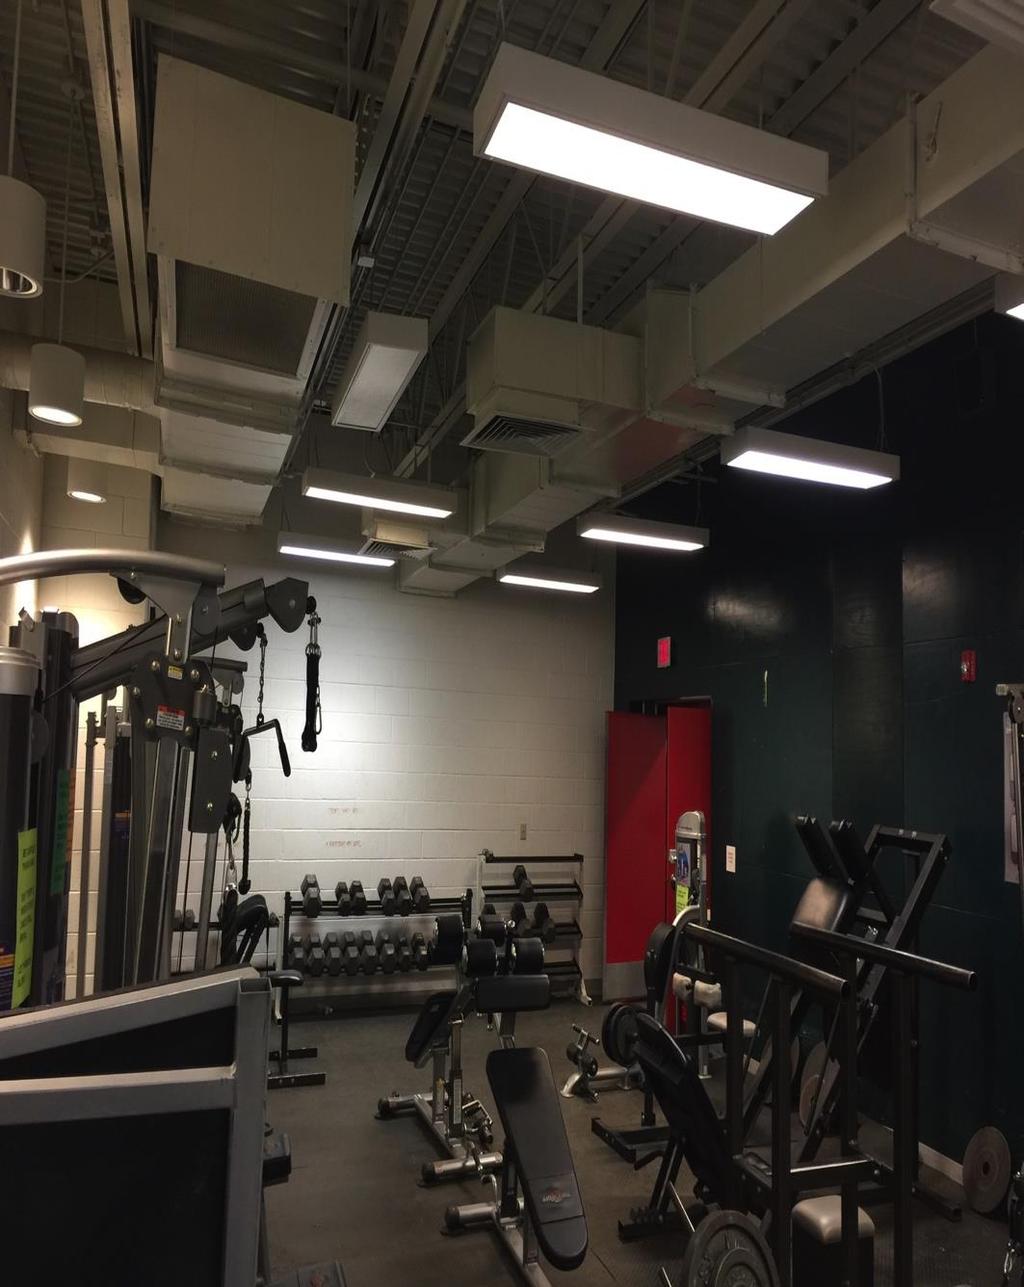 SHS Weight Room Concerns Overall Impression of Room/Conclusions: This room has some serious safety concerns The